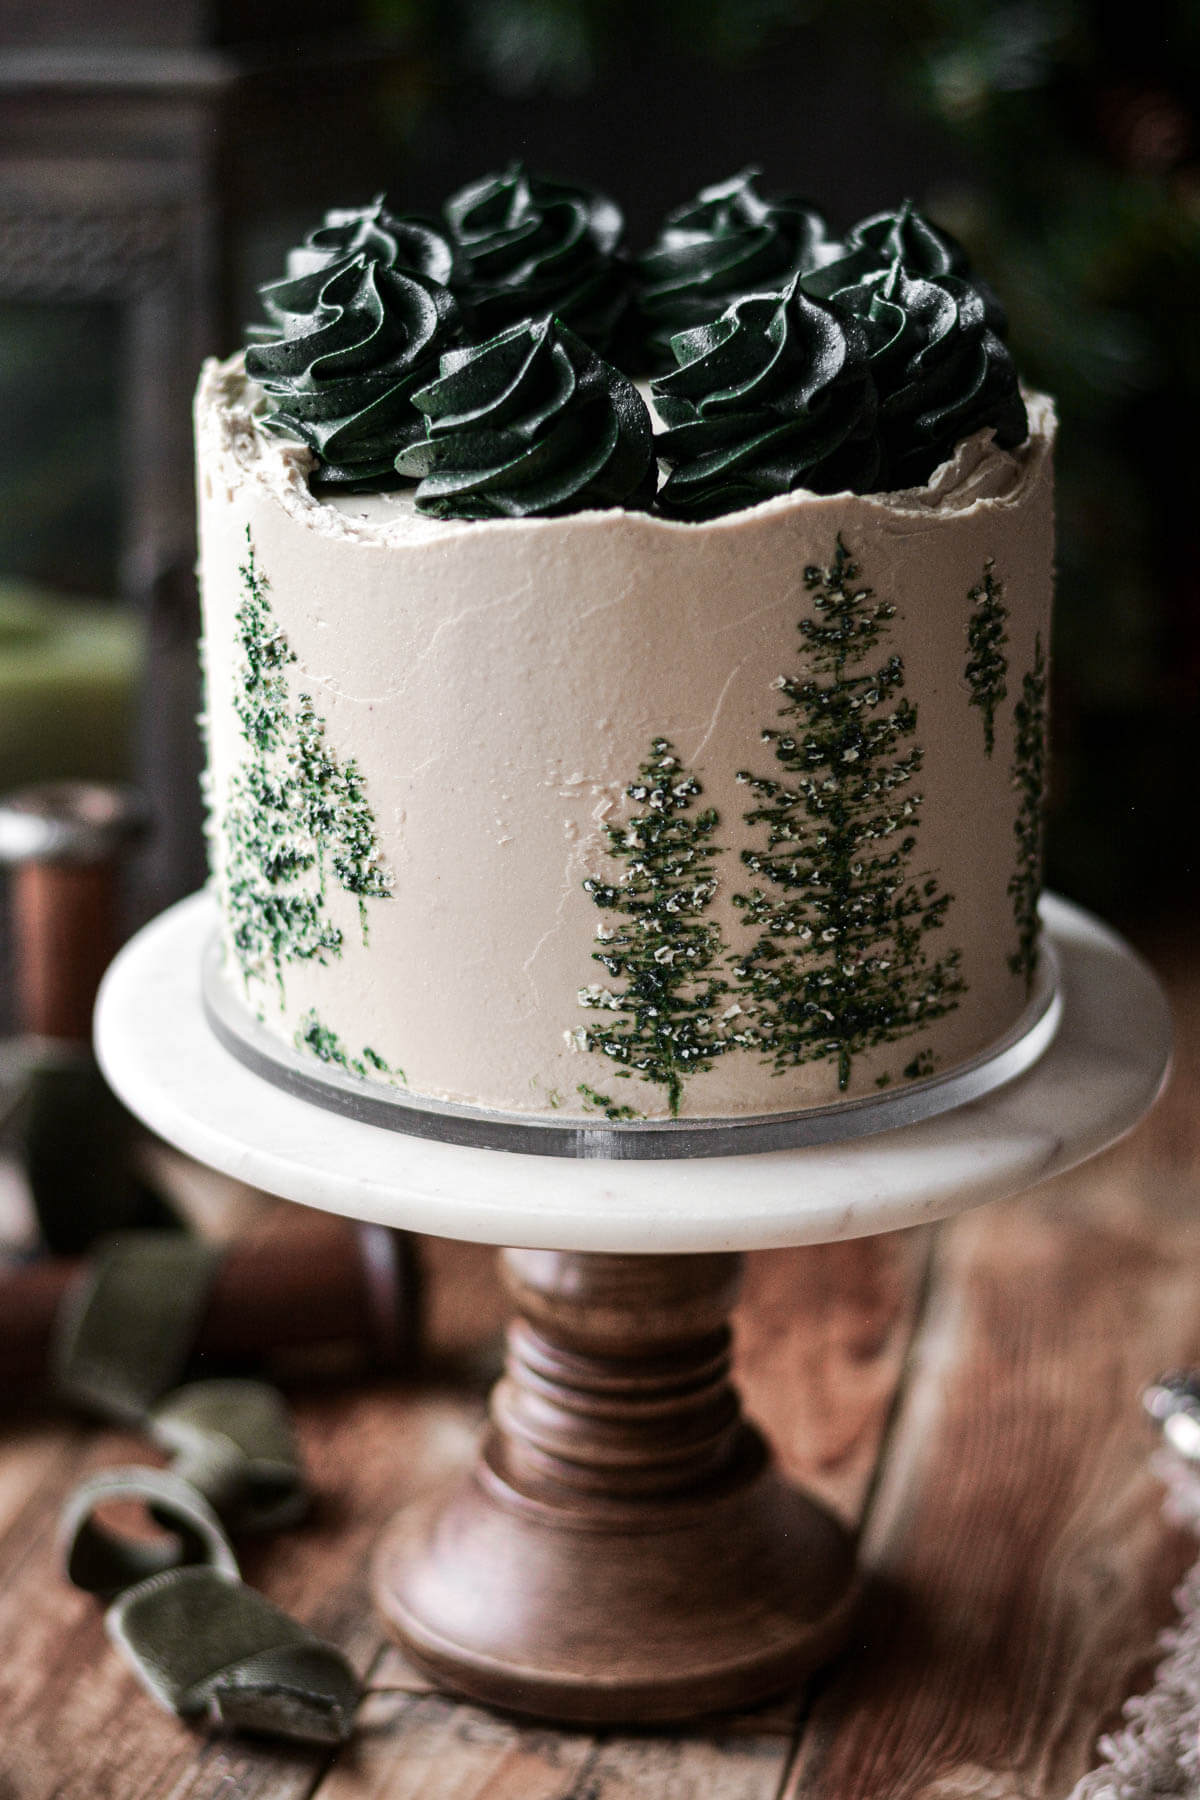 Chocolate maple cake with green evergreen trees painted onto the cake.